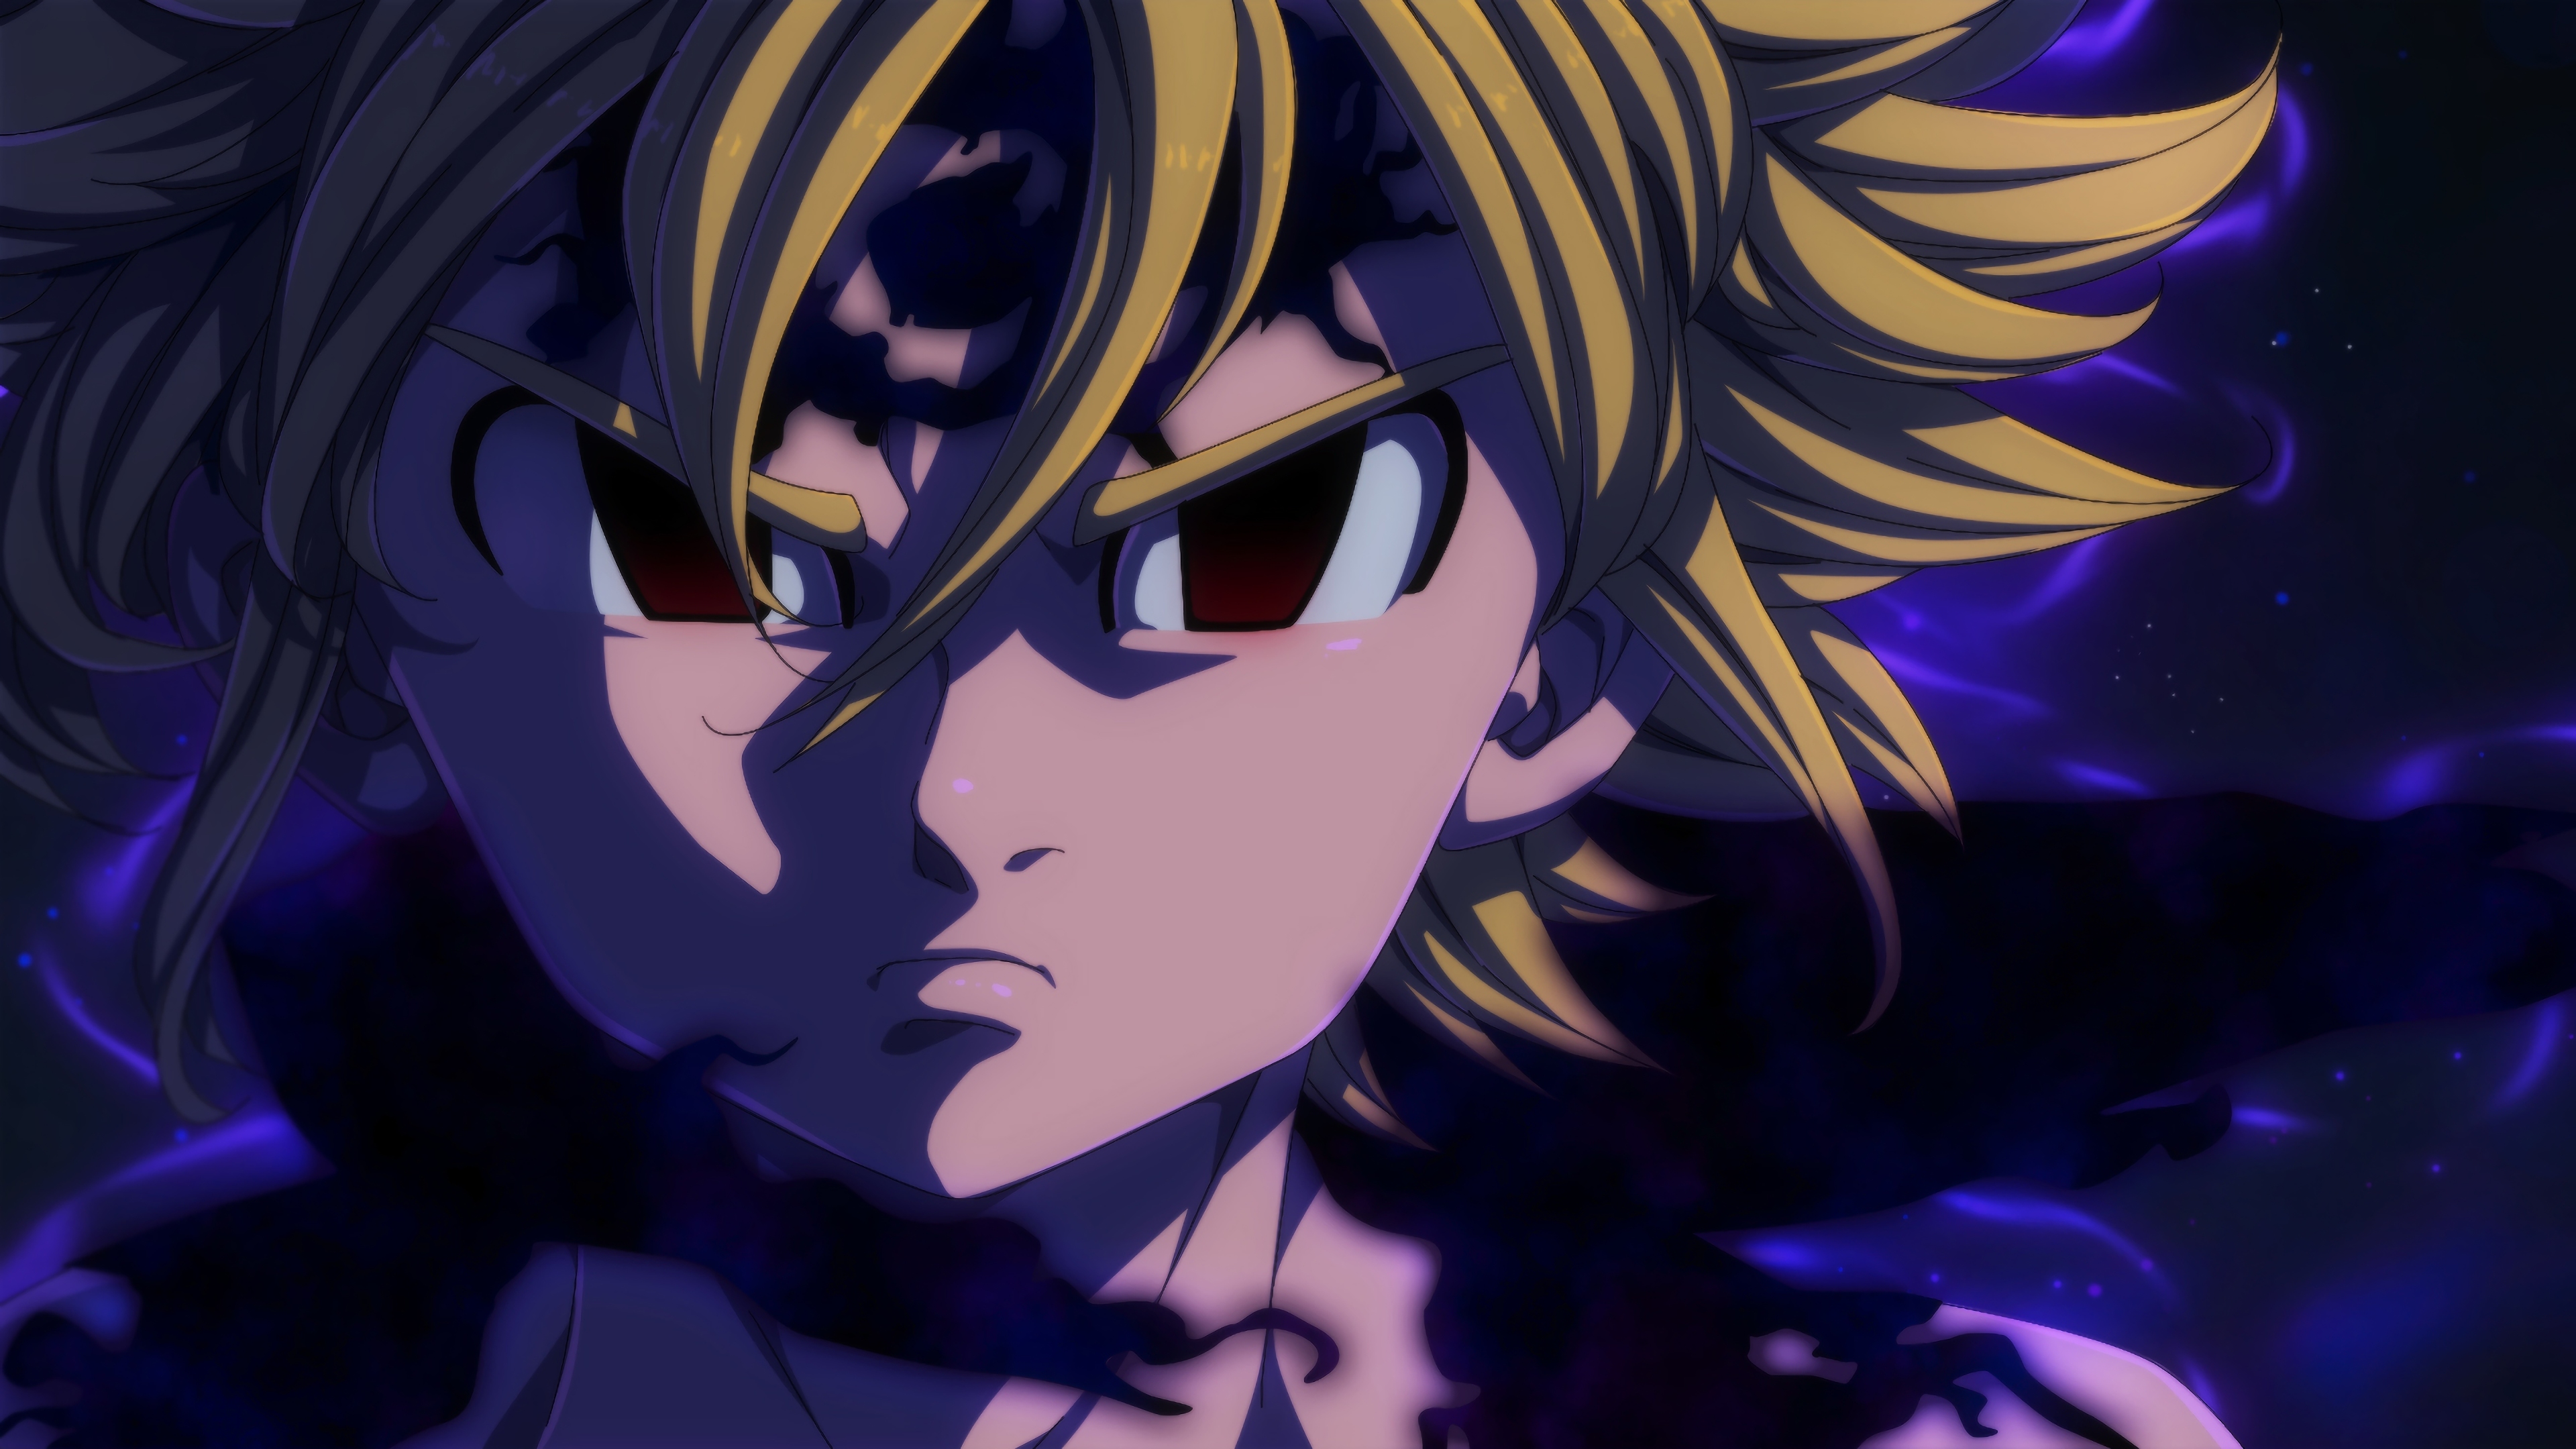  Demon King The Seven Deadly Sins HD Wallpapers and Backgrounds